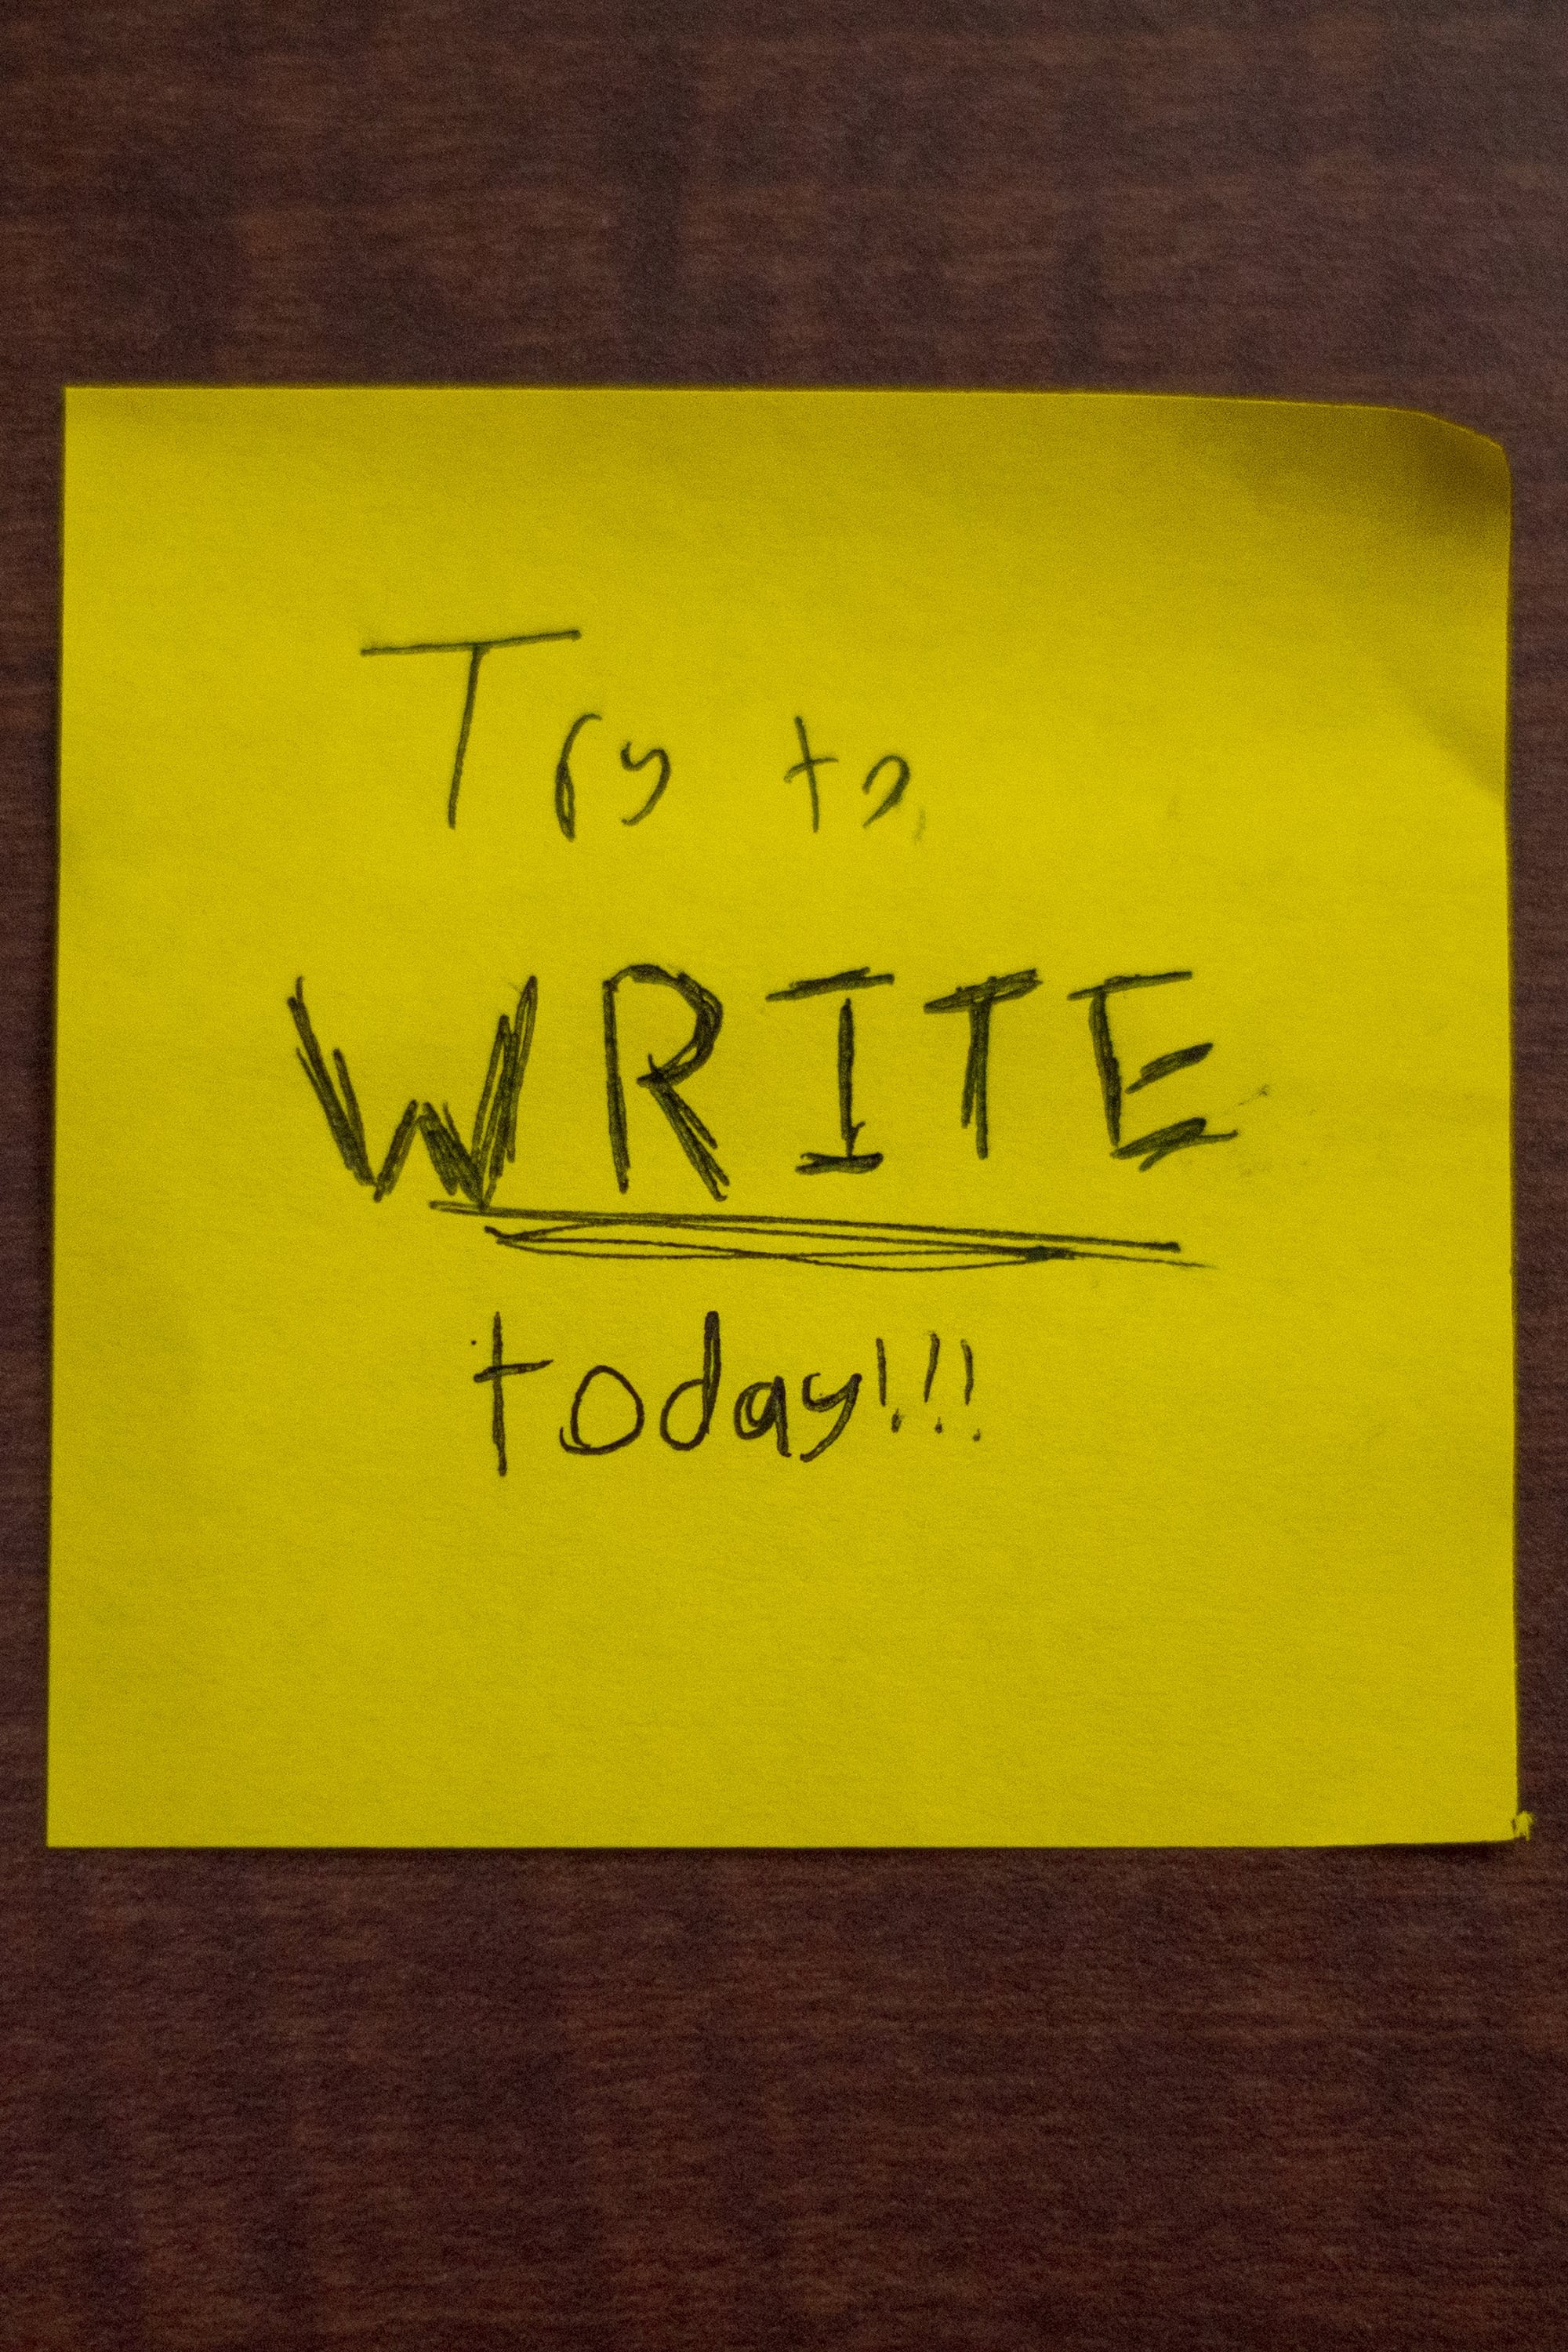 Try to WRITE today!!!